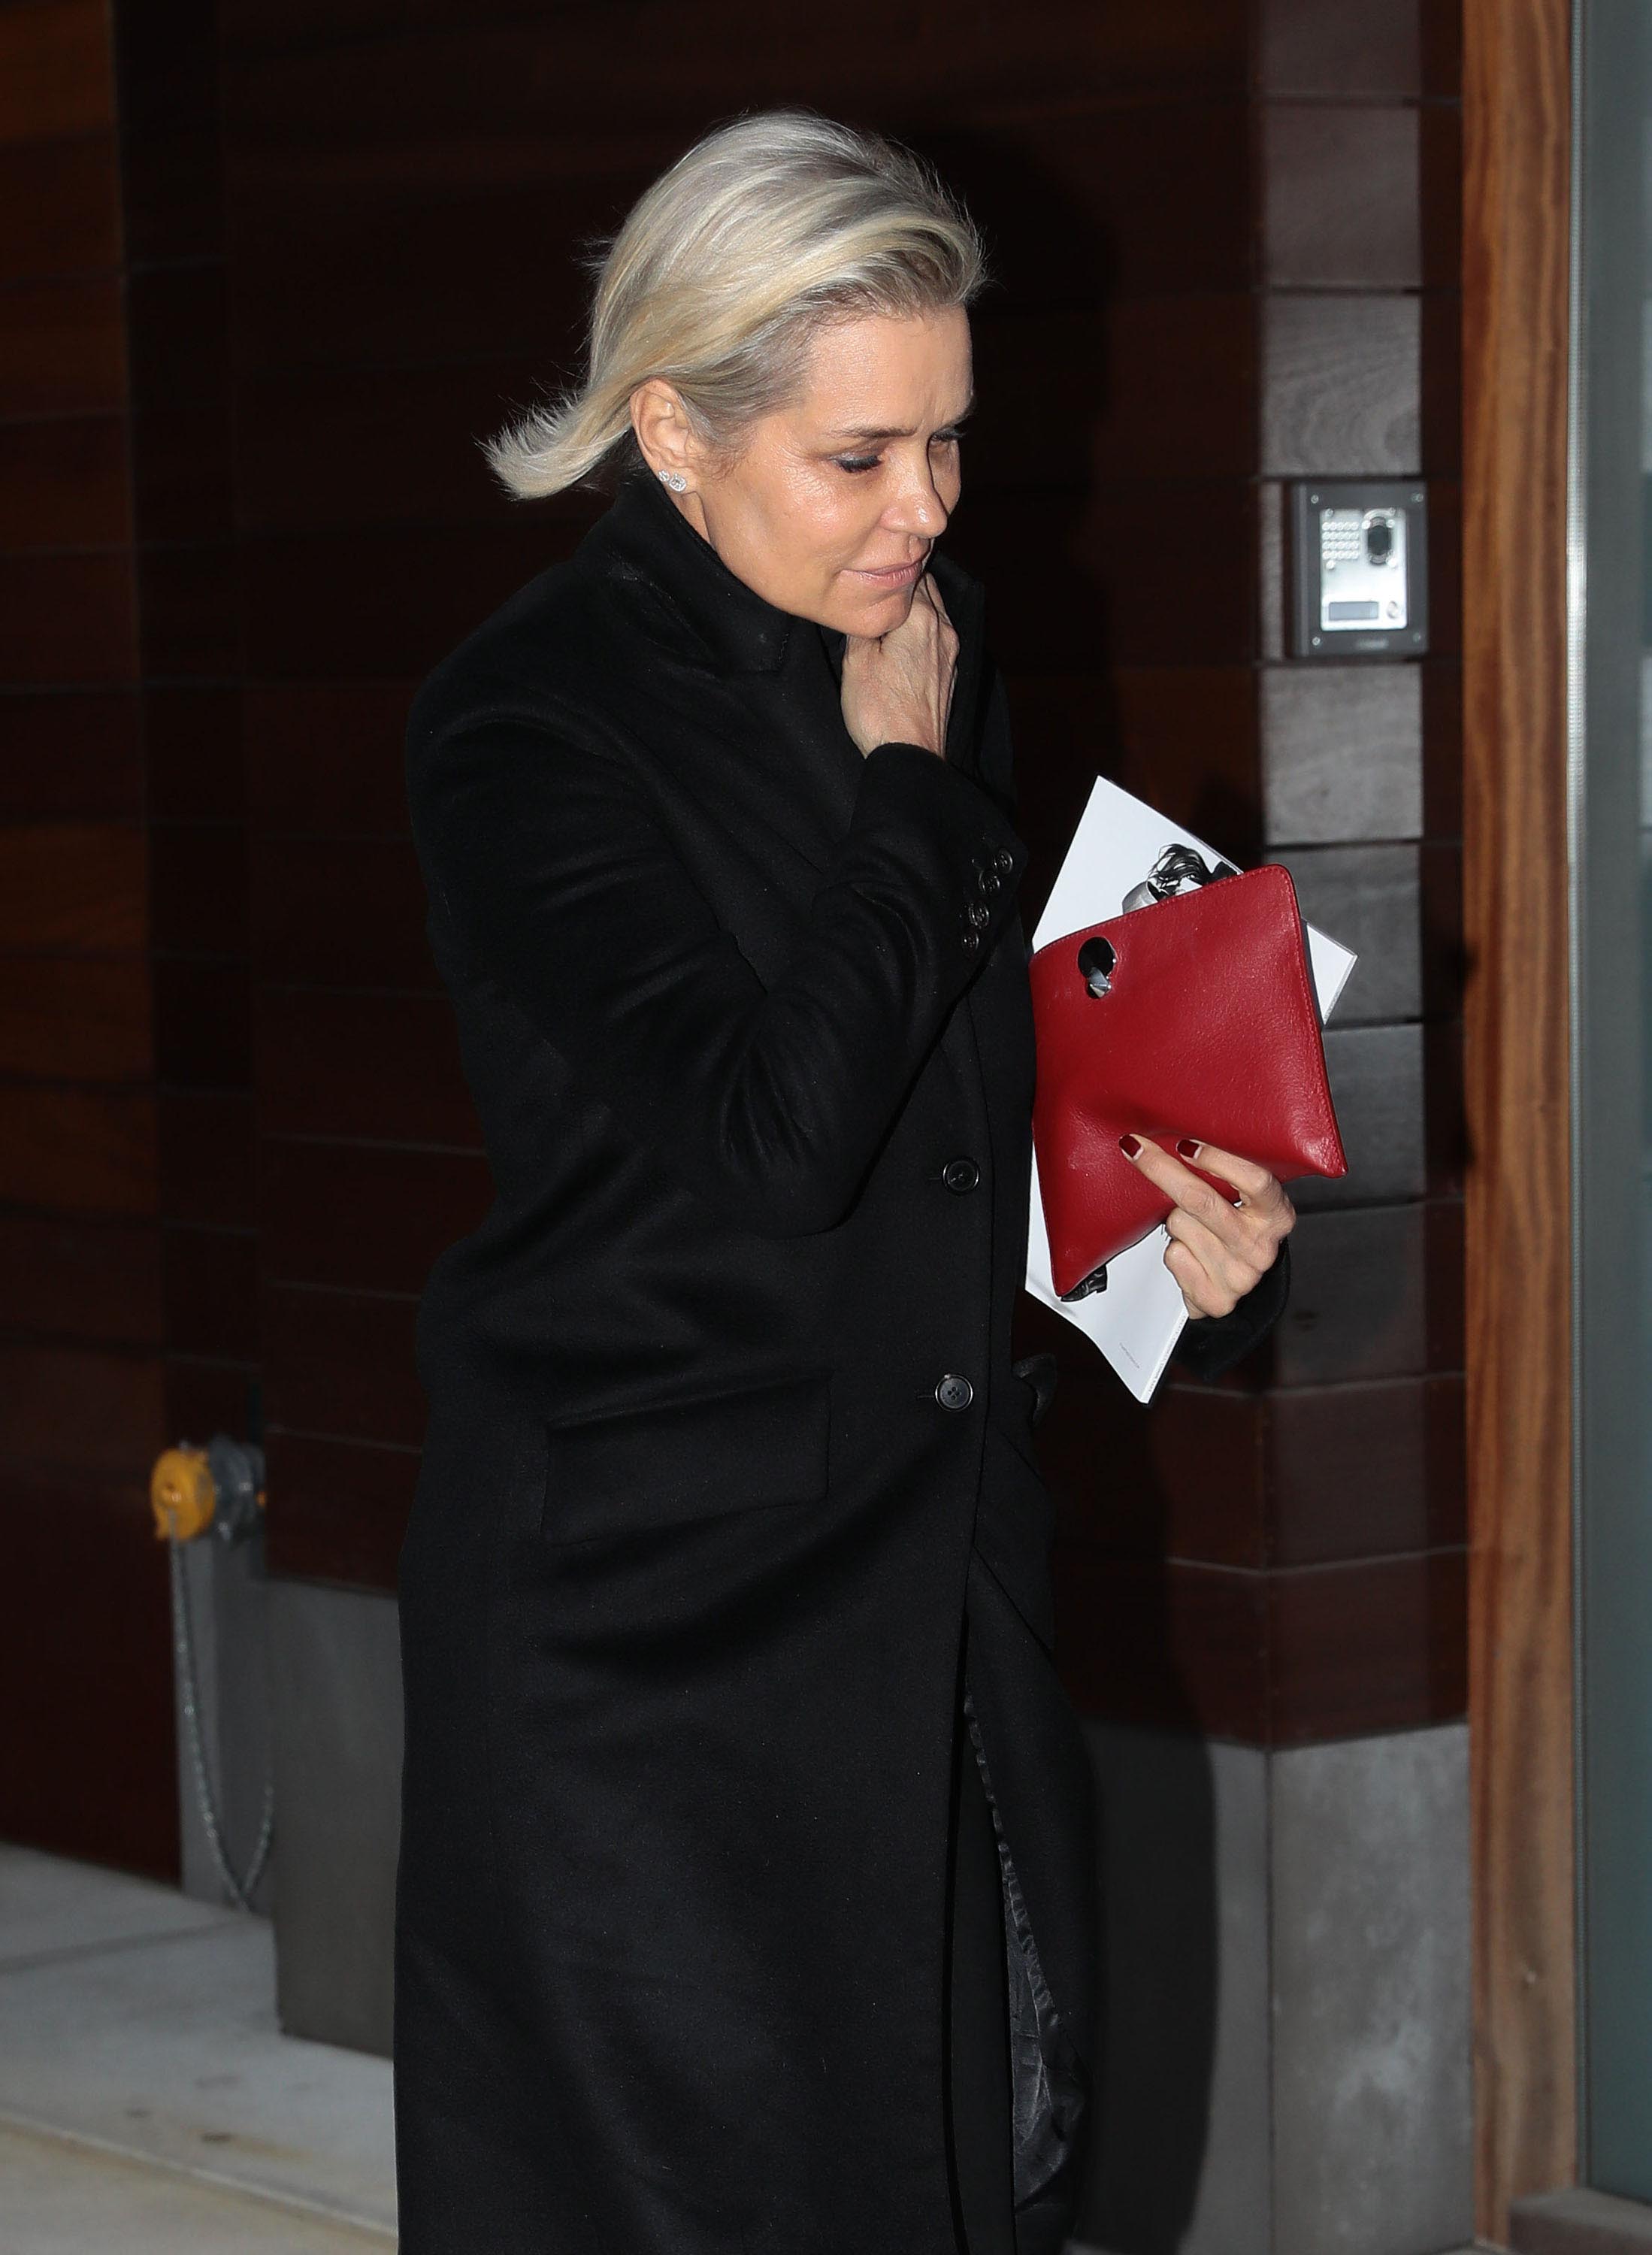 Yolanda Hadid is spotted out and about in NYC